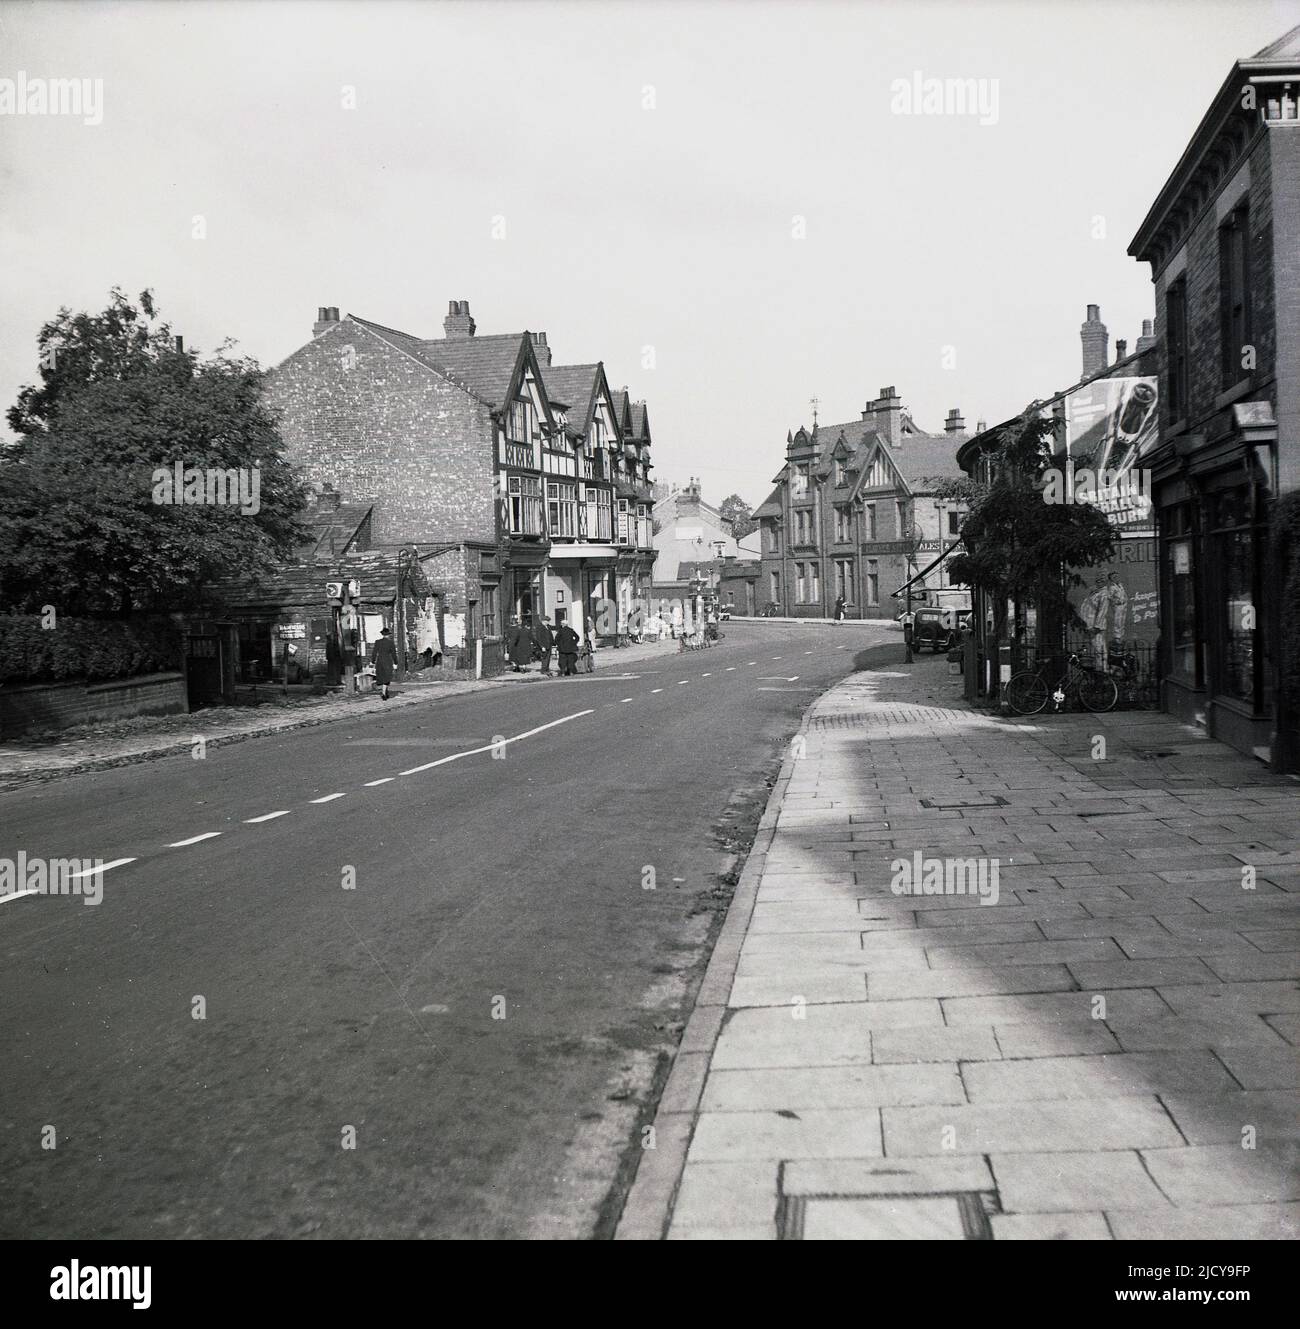 1940, historical, view from the south of the village of Bramhall, a suburb of Stockport, Greater Manchester, England, UK. On the right, a building with a poster, 'Beat Firebomb Fritz' - 'Britain Shall Not Burn' with a picture of a Nazi rocket. During WW2 the Ministry of Home Security commissioned artist Fritz Rosen to produce posters which reassured the public about the Blitz, the Nazi bomb campaign of 1940-1941. Rosen created a cartoon character known as ‘Firebomb Fritz’ that was shaped like a German incendiary bomb with an angry looking face. Stock Photo